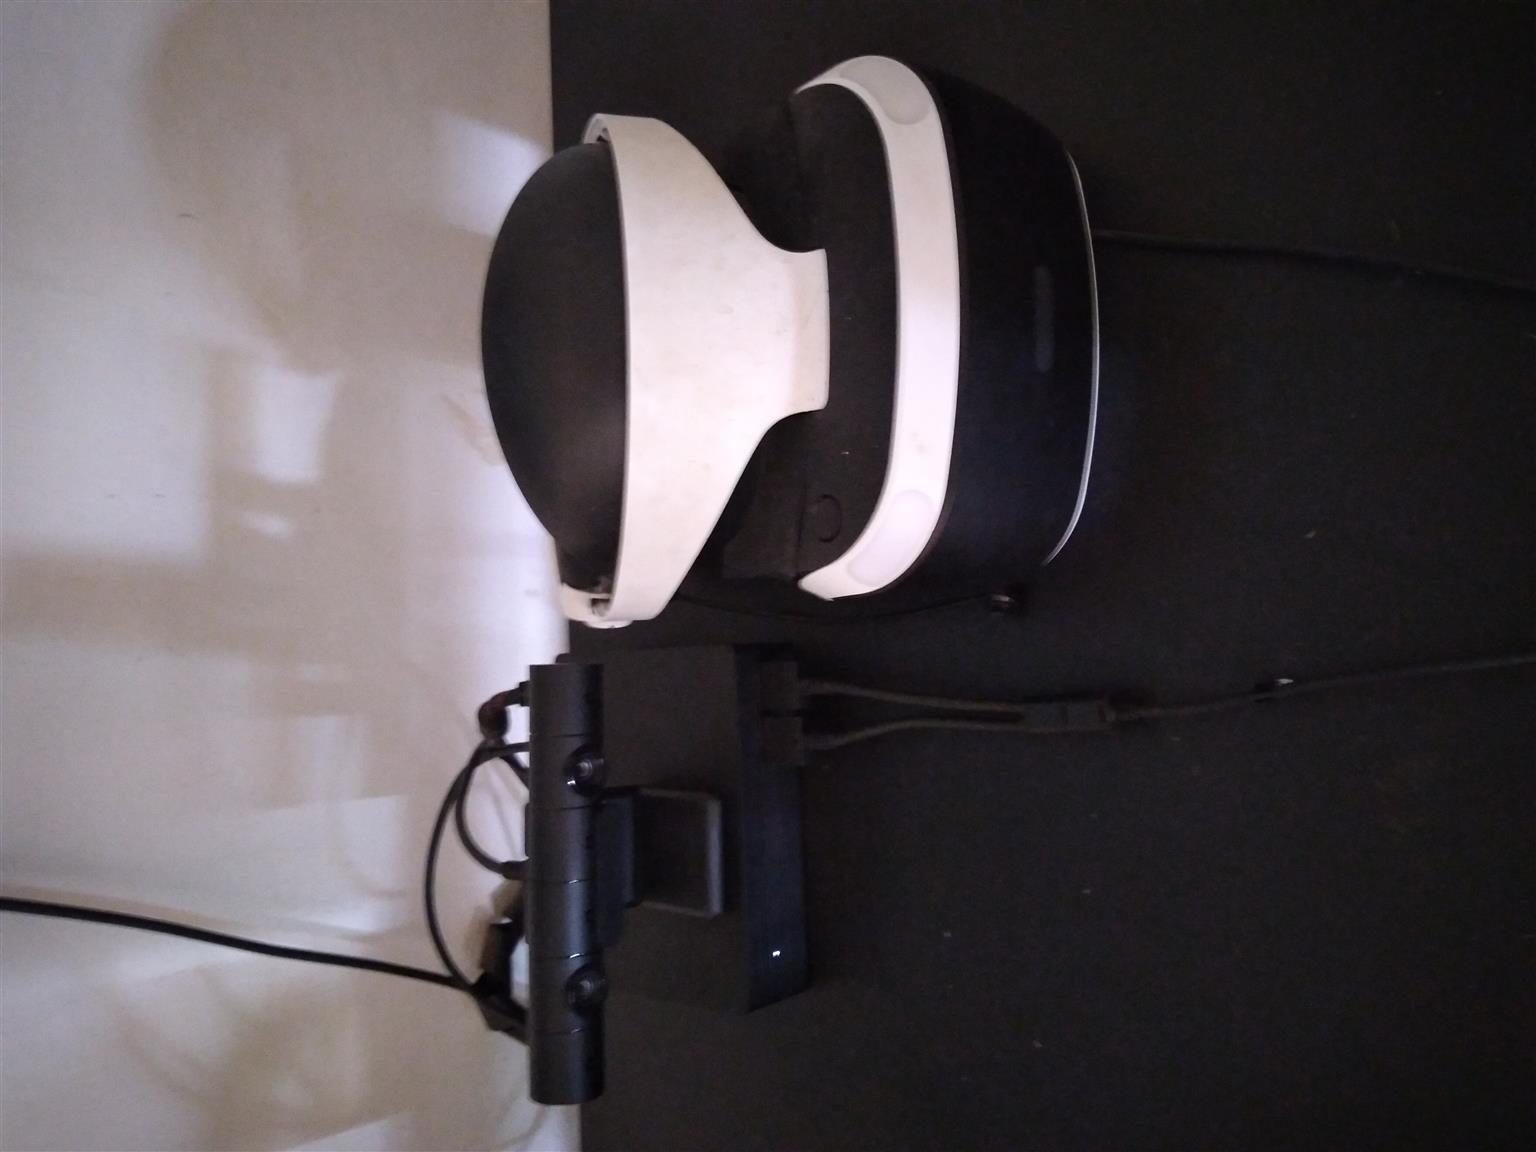 Ps4 vr headset like new